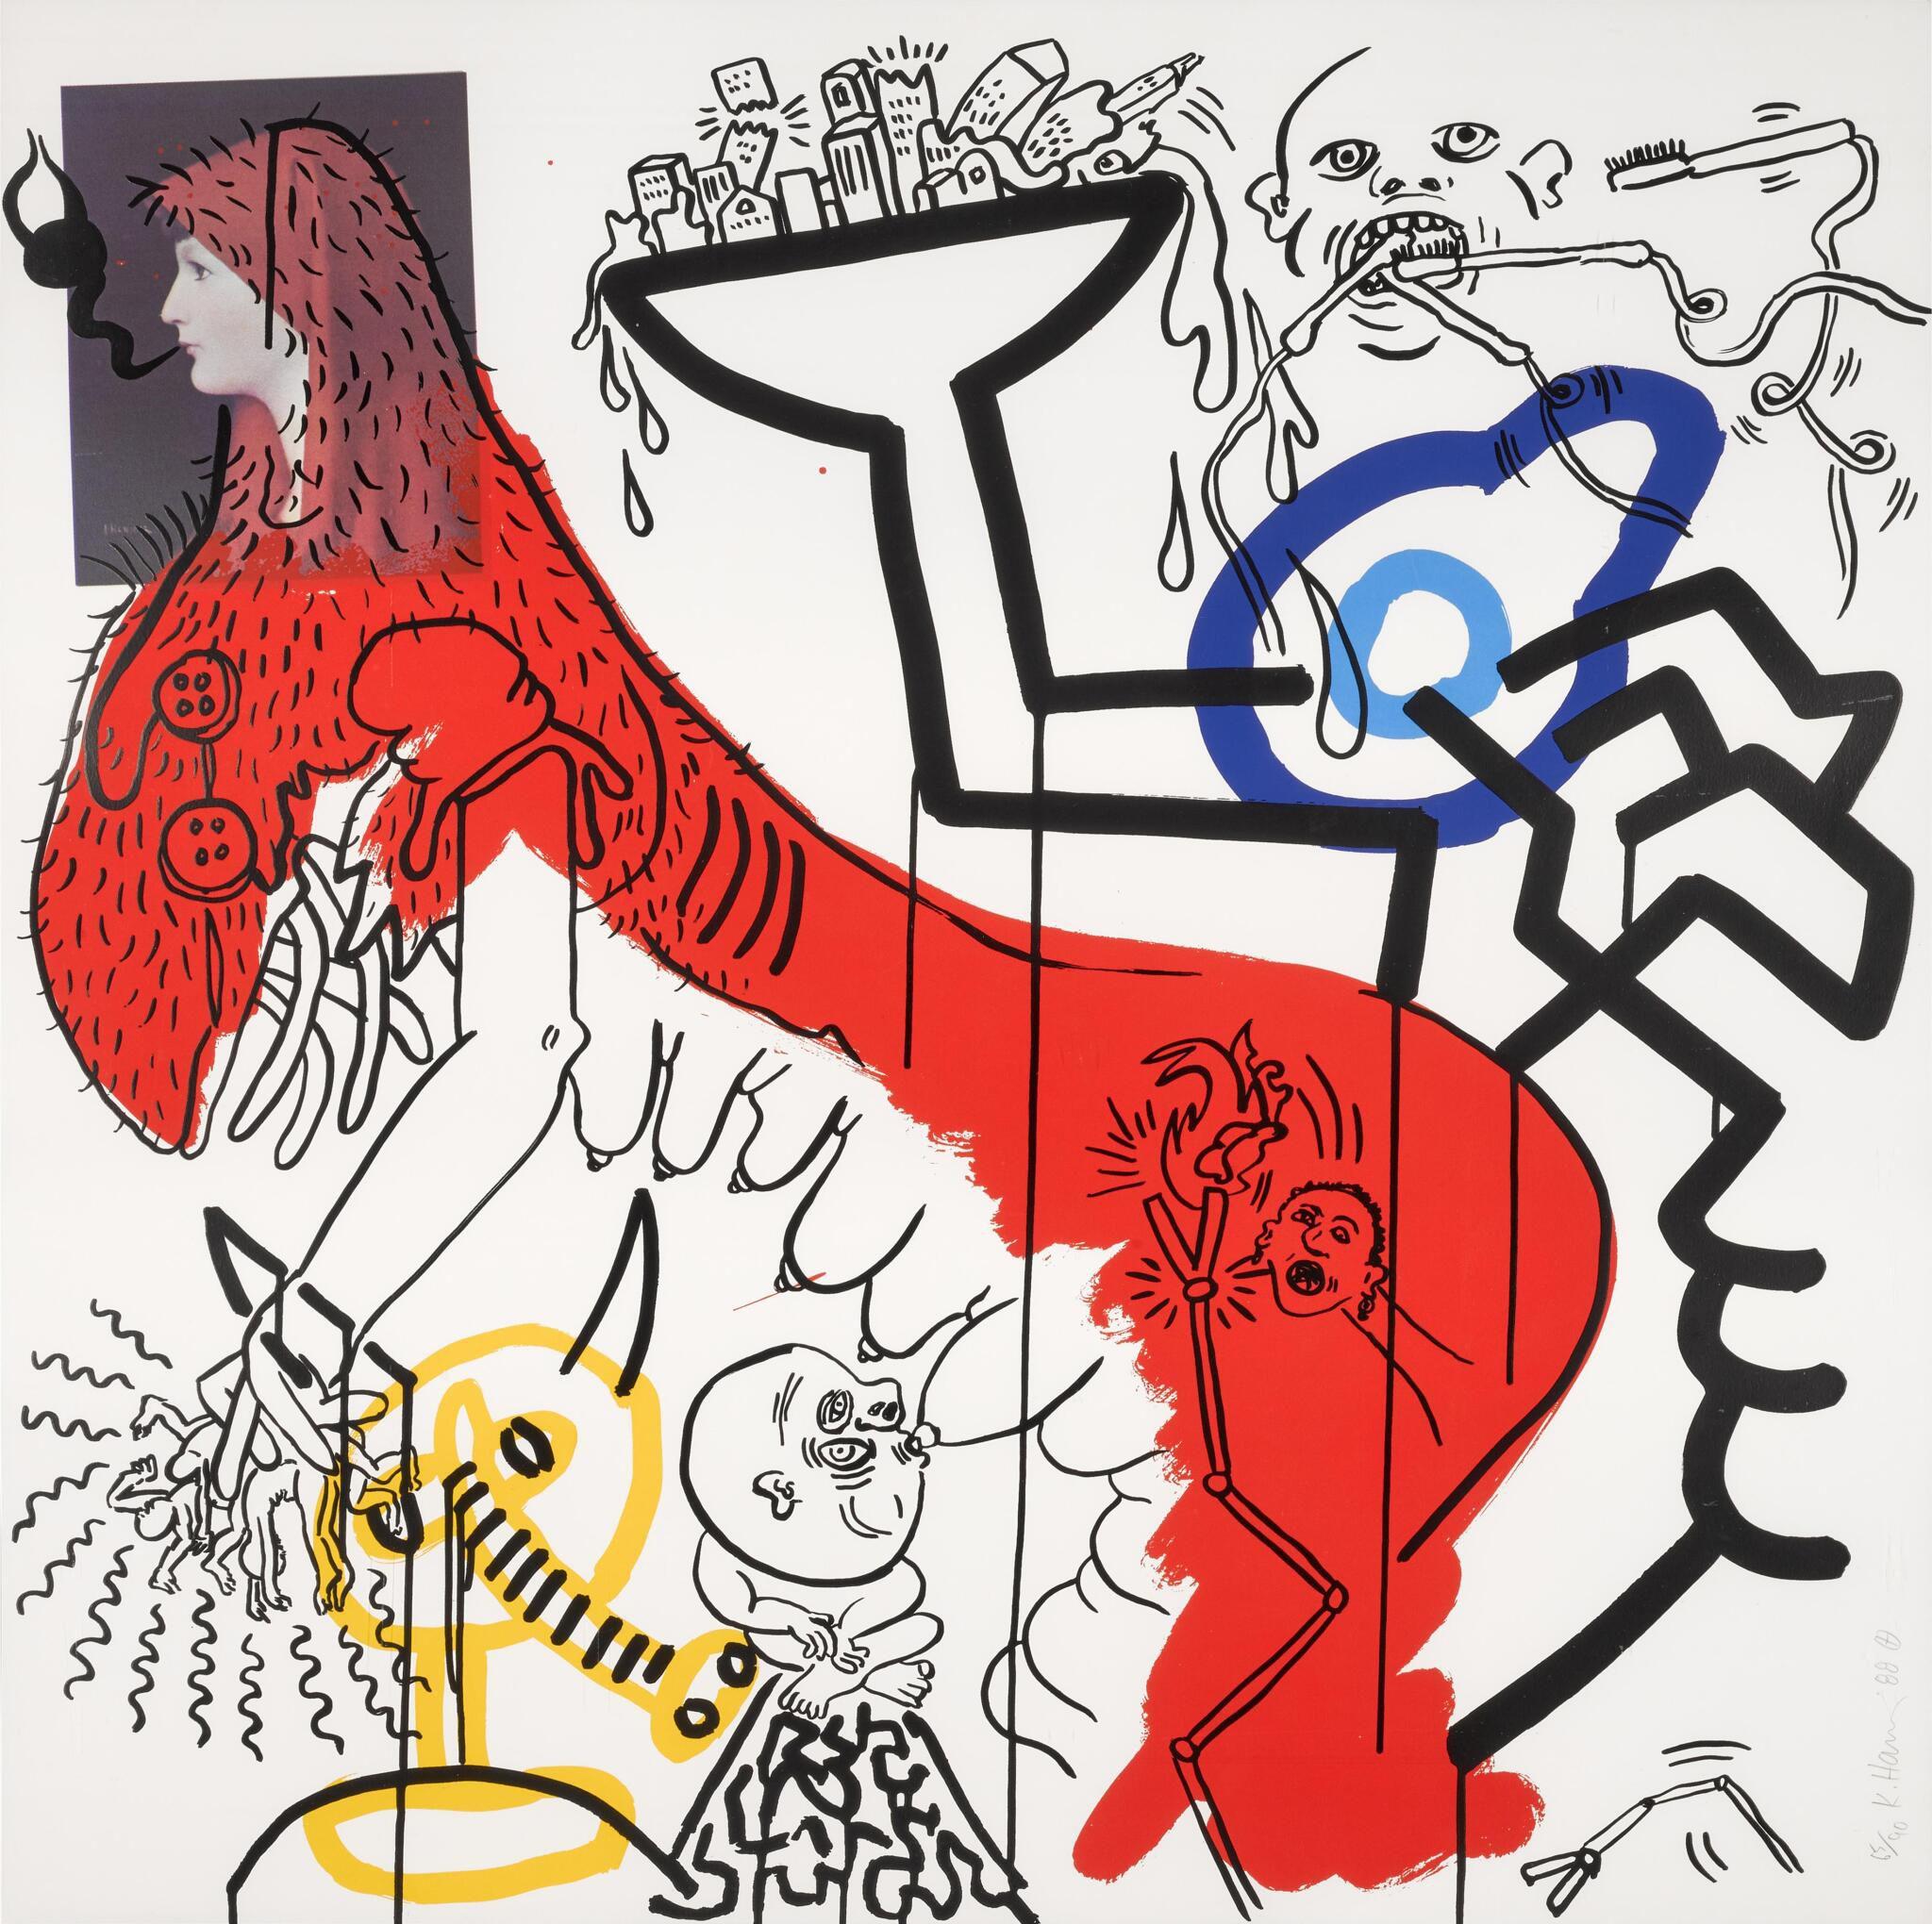 Apocalypse IV - Print by Keith Haring